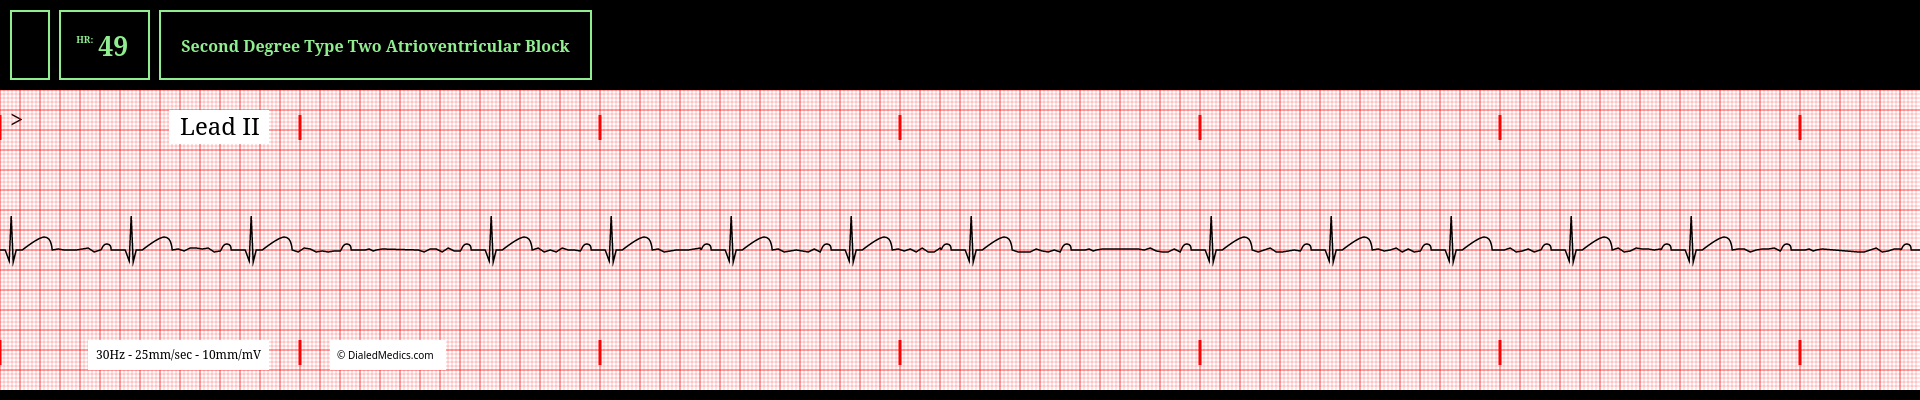 19sec electrocardiogram tracing of an apparent Second Degree Type Two 5:1 Heart Block